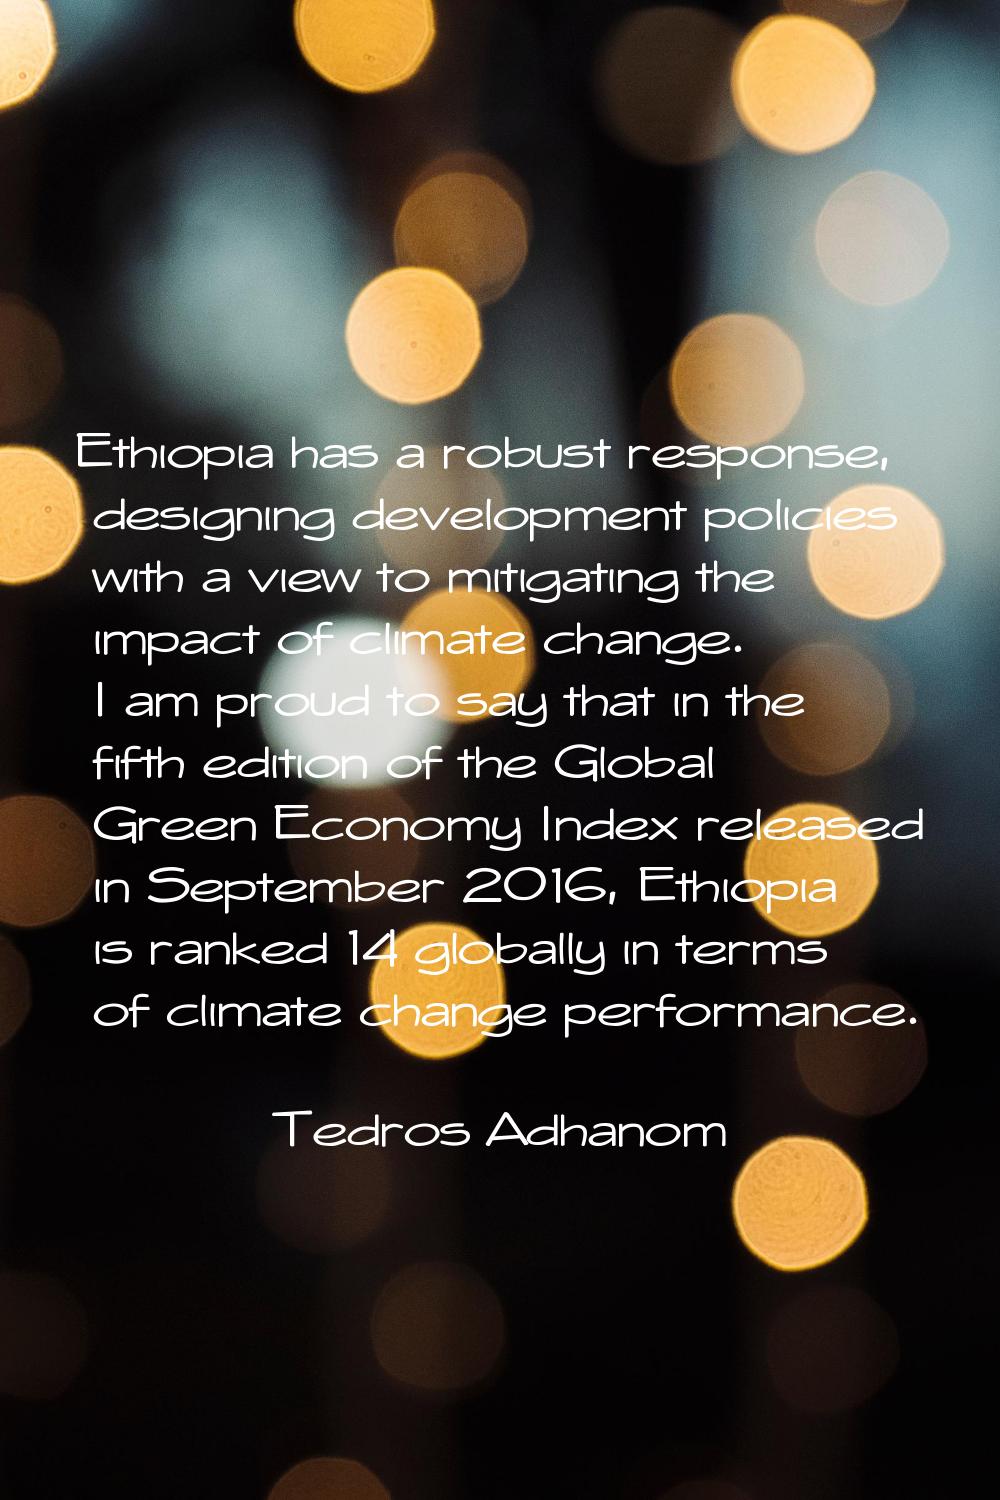 Ethiopia has a robust response, designing development policies with a view to mitigating the impact